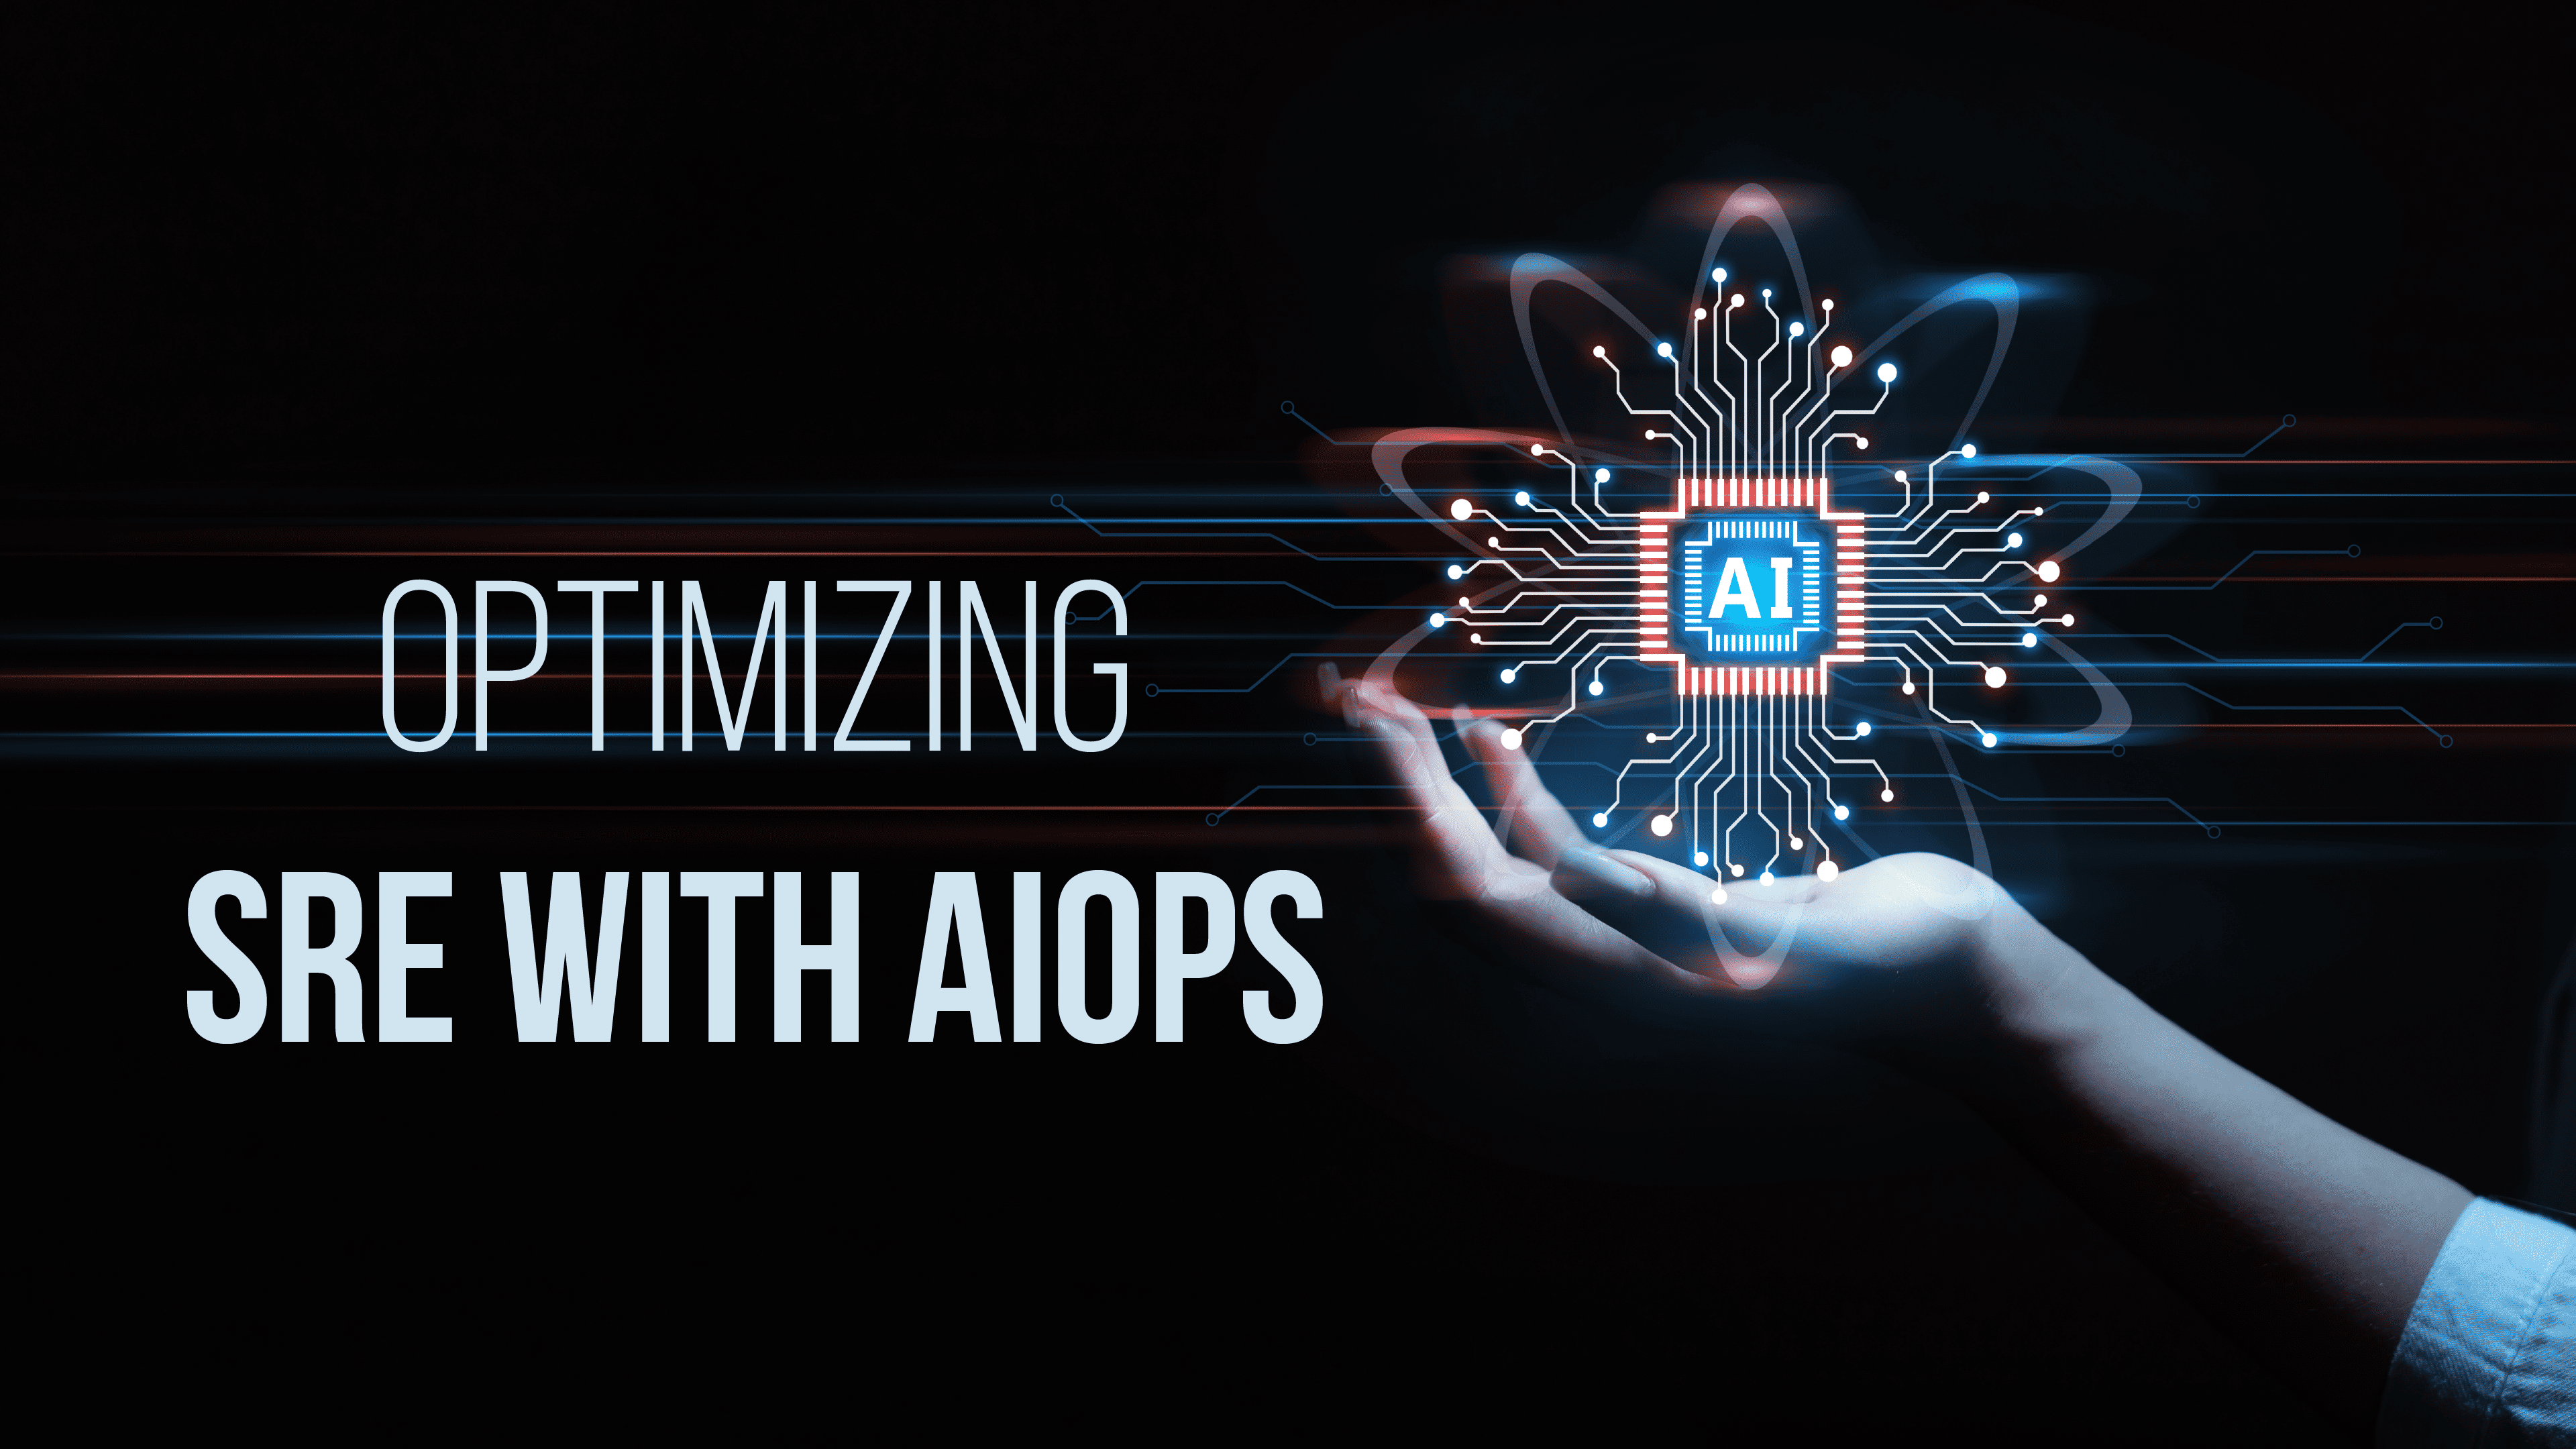 Optimizing SRE with AIOps